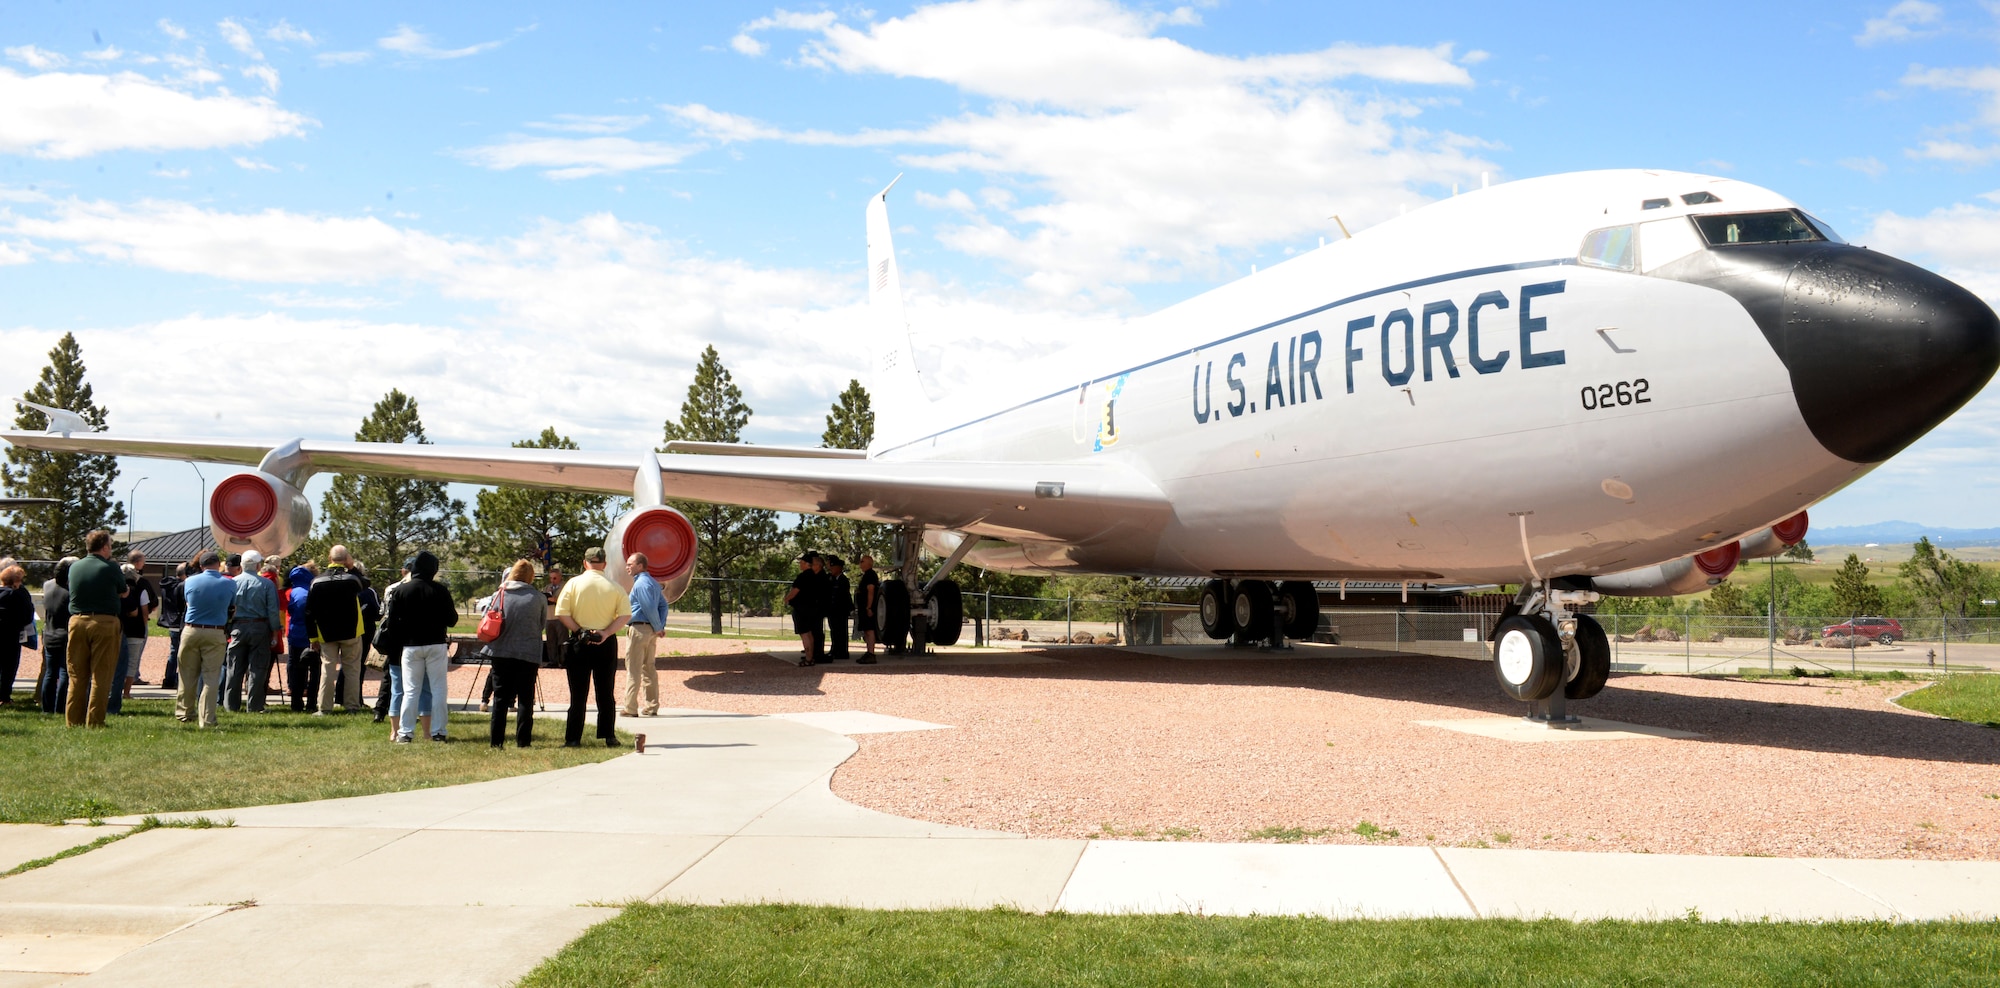 Members of the 4th Airborne Command Control Squadron attend a memorial dedication during the 25th anniversary of the deactivation of the 4th ACCS at the South Dakota Air and Space Museum, Box Elder, S.D., June 24, 2017. A bench displaying images of the EC-135 was dedicated to those who served in the squadron and have passed away. The bench sits on the museum grounds under tail 262, nicknamed “Too Sick to Fly.” (U.S. Air Force photo by Staff Sgt. Hailey Staker)